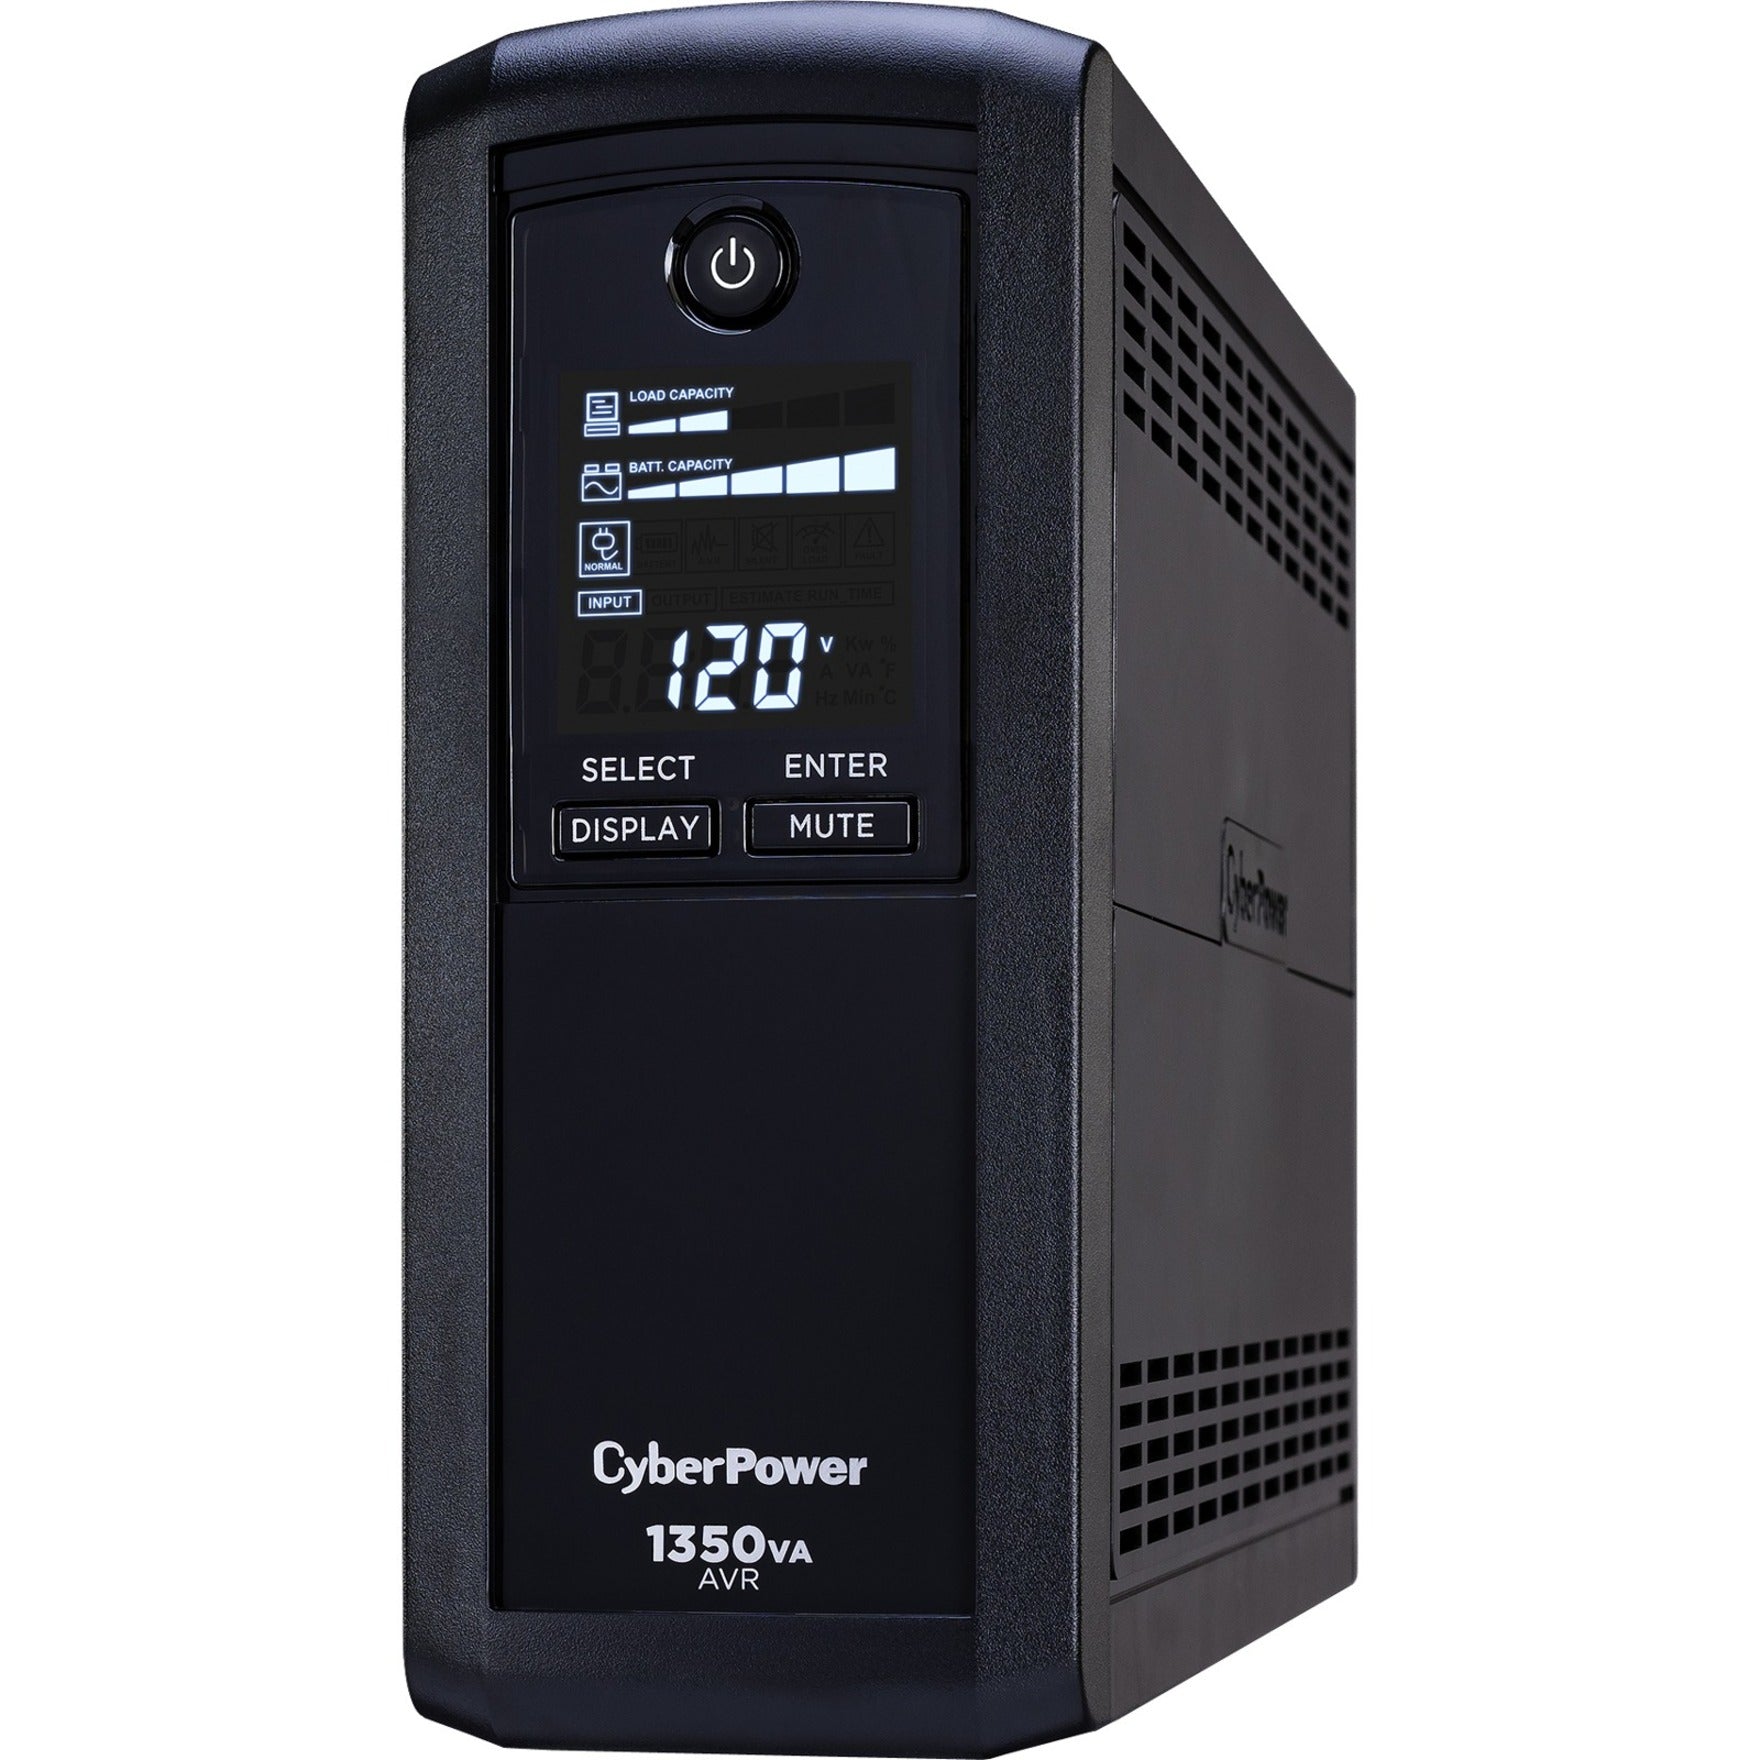 CyberPower CP1350AVRLCD Intelligent LCD UPS Systems, 1350 VA/815 W, 3 Year Warranty, Energy Star, USB and Serial Port